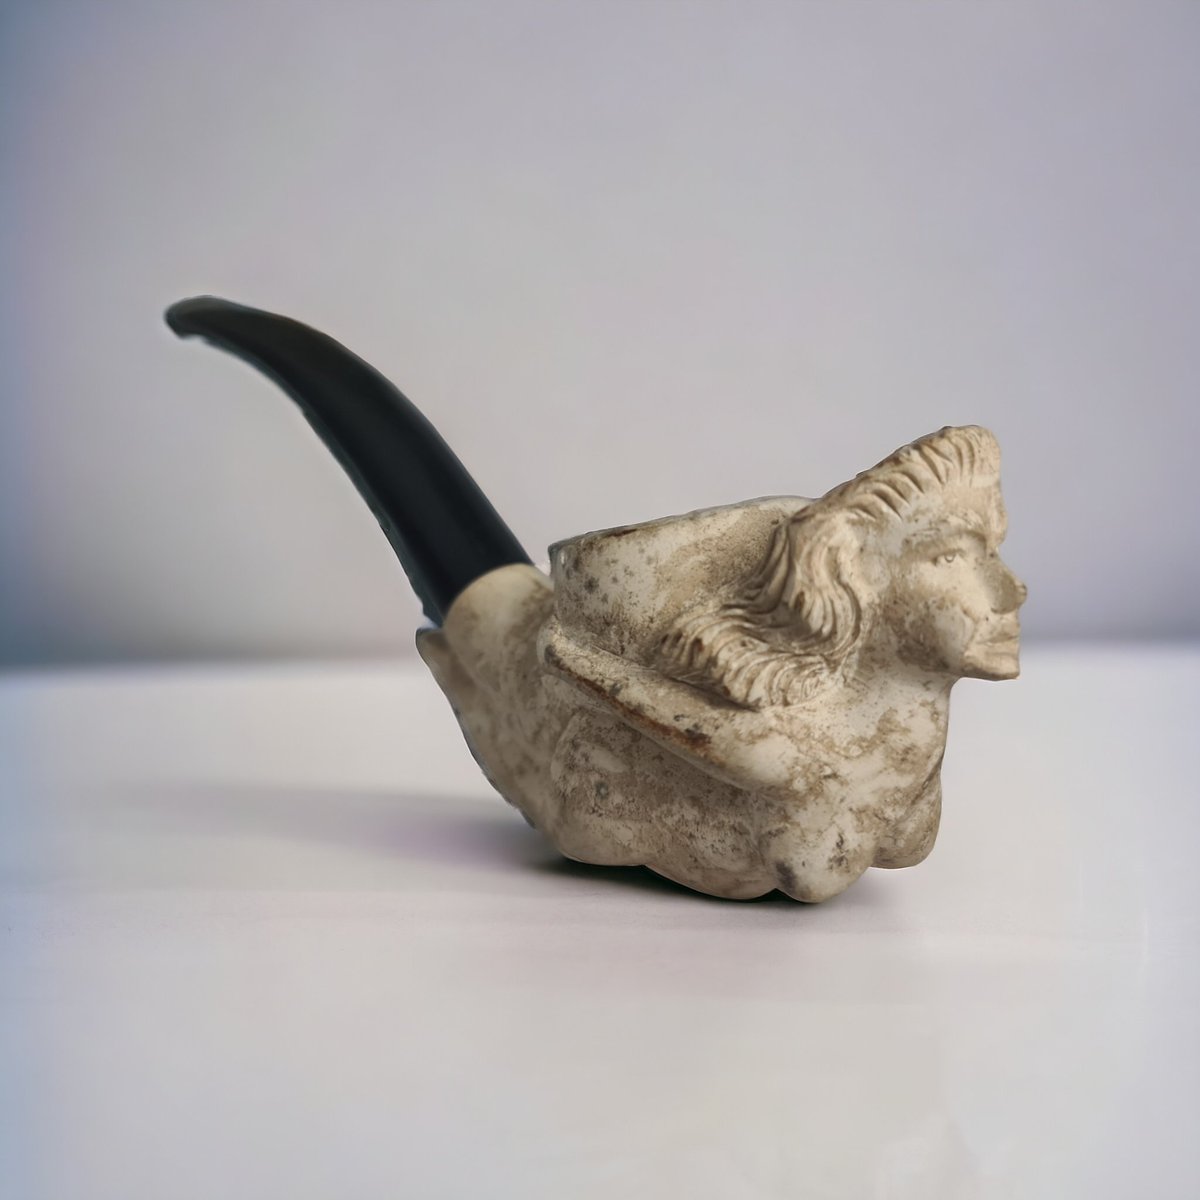 Meerschaum pipe with the bowl in the form of a naked female ship figurehead. Featuring in our upcoming Antiques and Estates auction.

Enquiries to auction@swandeverell.com.au

#antiques #vintage #collectables #tobacciana #meerschaum #pipesmoking #auction #centralcoast